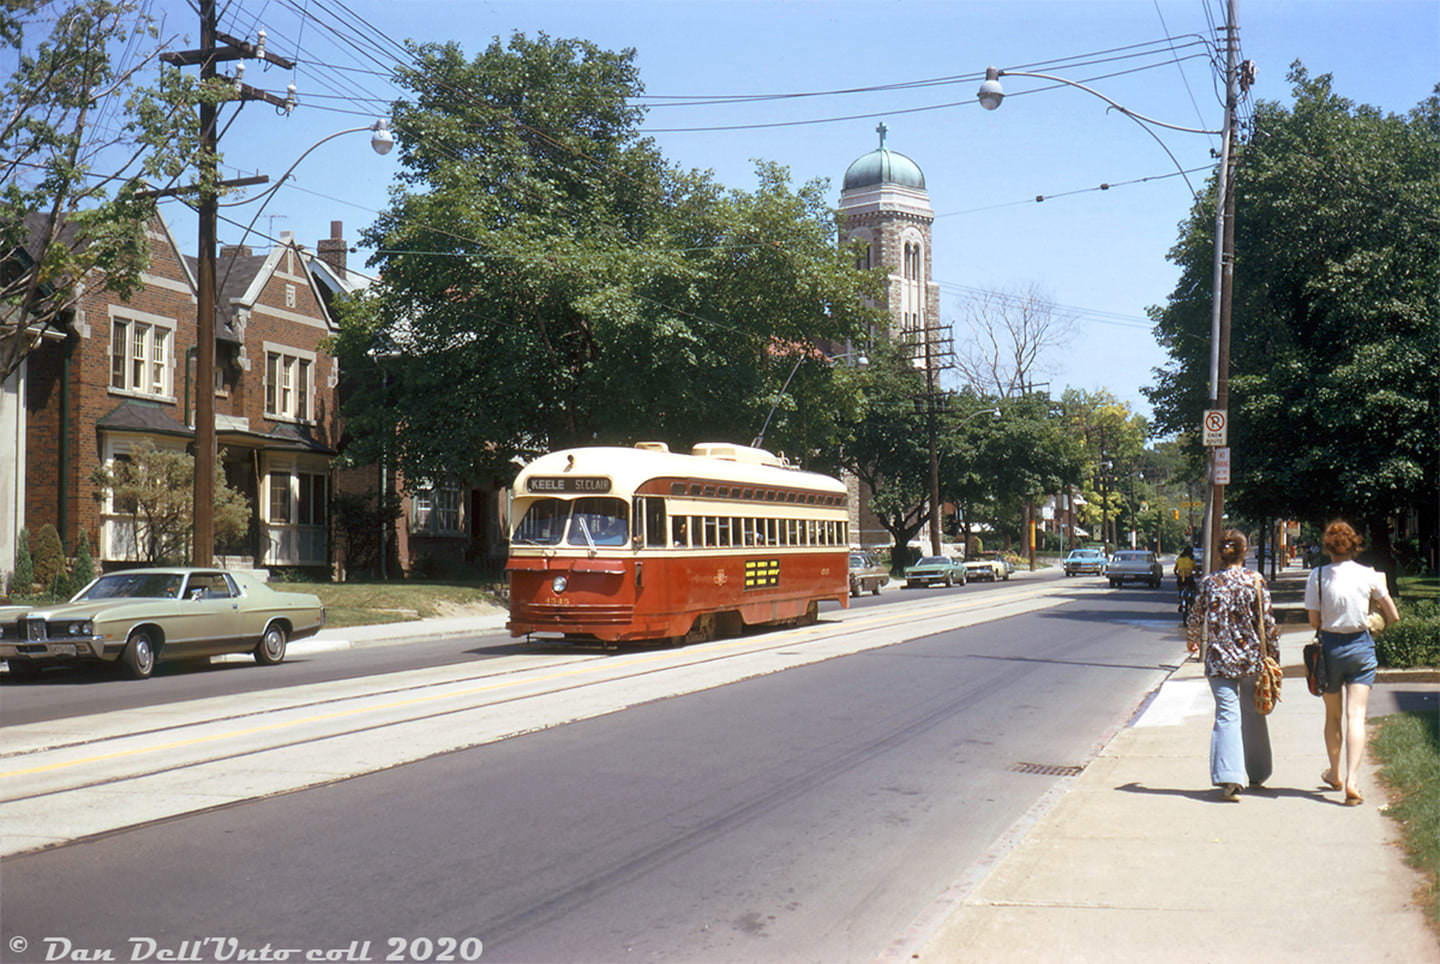 TTC PCC streetcar 4545 heads westbound on St. Clair Ave. East near Our Lady of Perpetual Help Catholic Church on a sunny Summer afternoon in 1972, after coming down Mount Pleasant Ave. from Eglinton loop at the end of the St. Clair route.